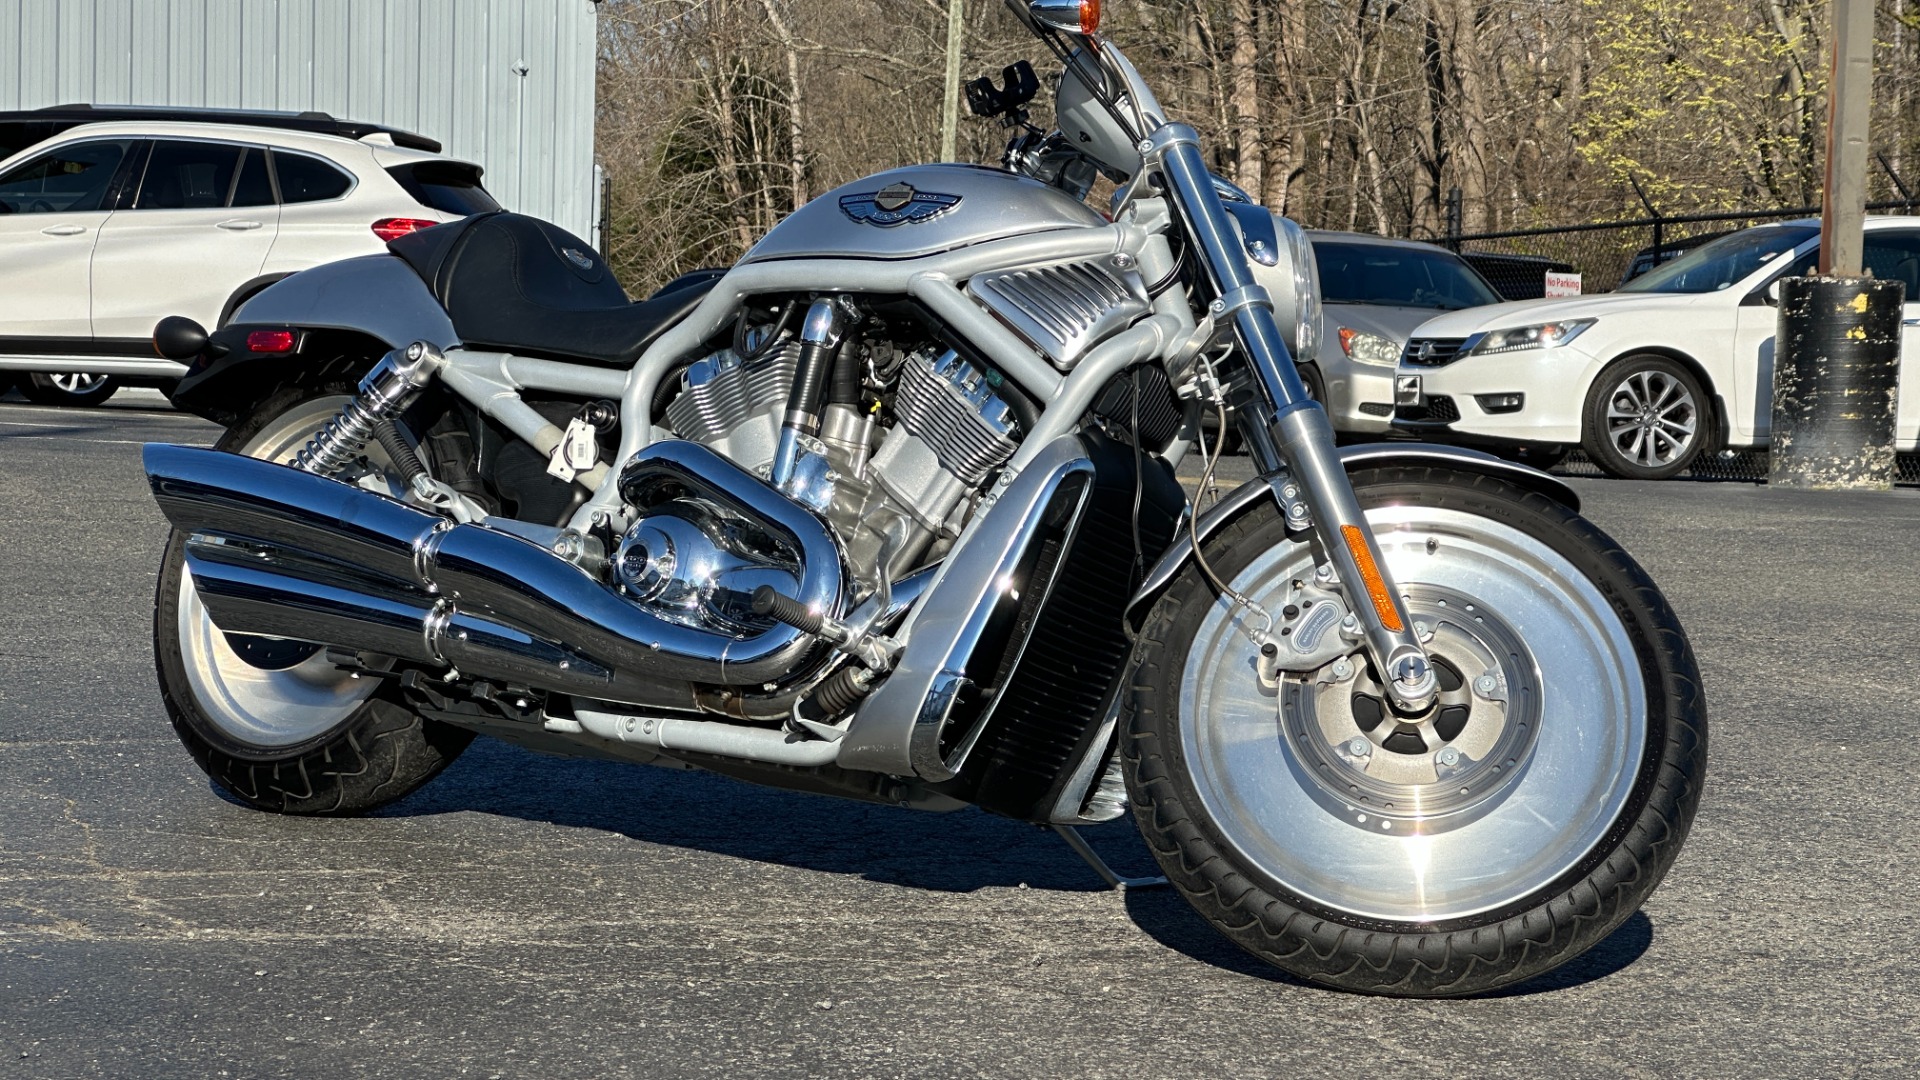 Used 2003 Harley Davidson V Rod ANNIVERSARY EDITION / 1130CC ENGINE / BREMBO BRAKES / VORTEX AIR SCOOPS for sale Sold at Formula Imports in Charlotte NC 28227 60